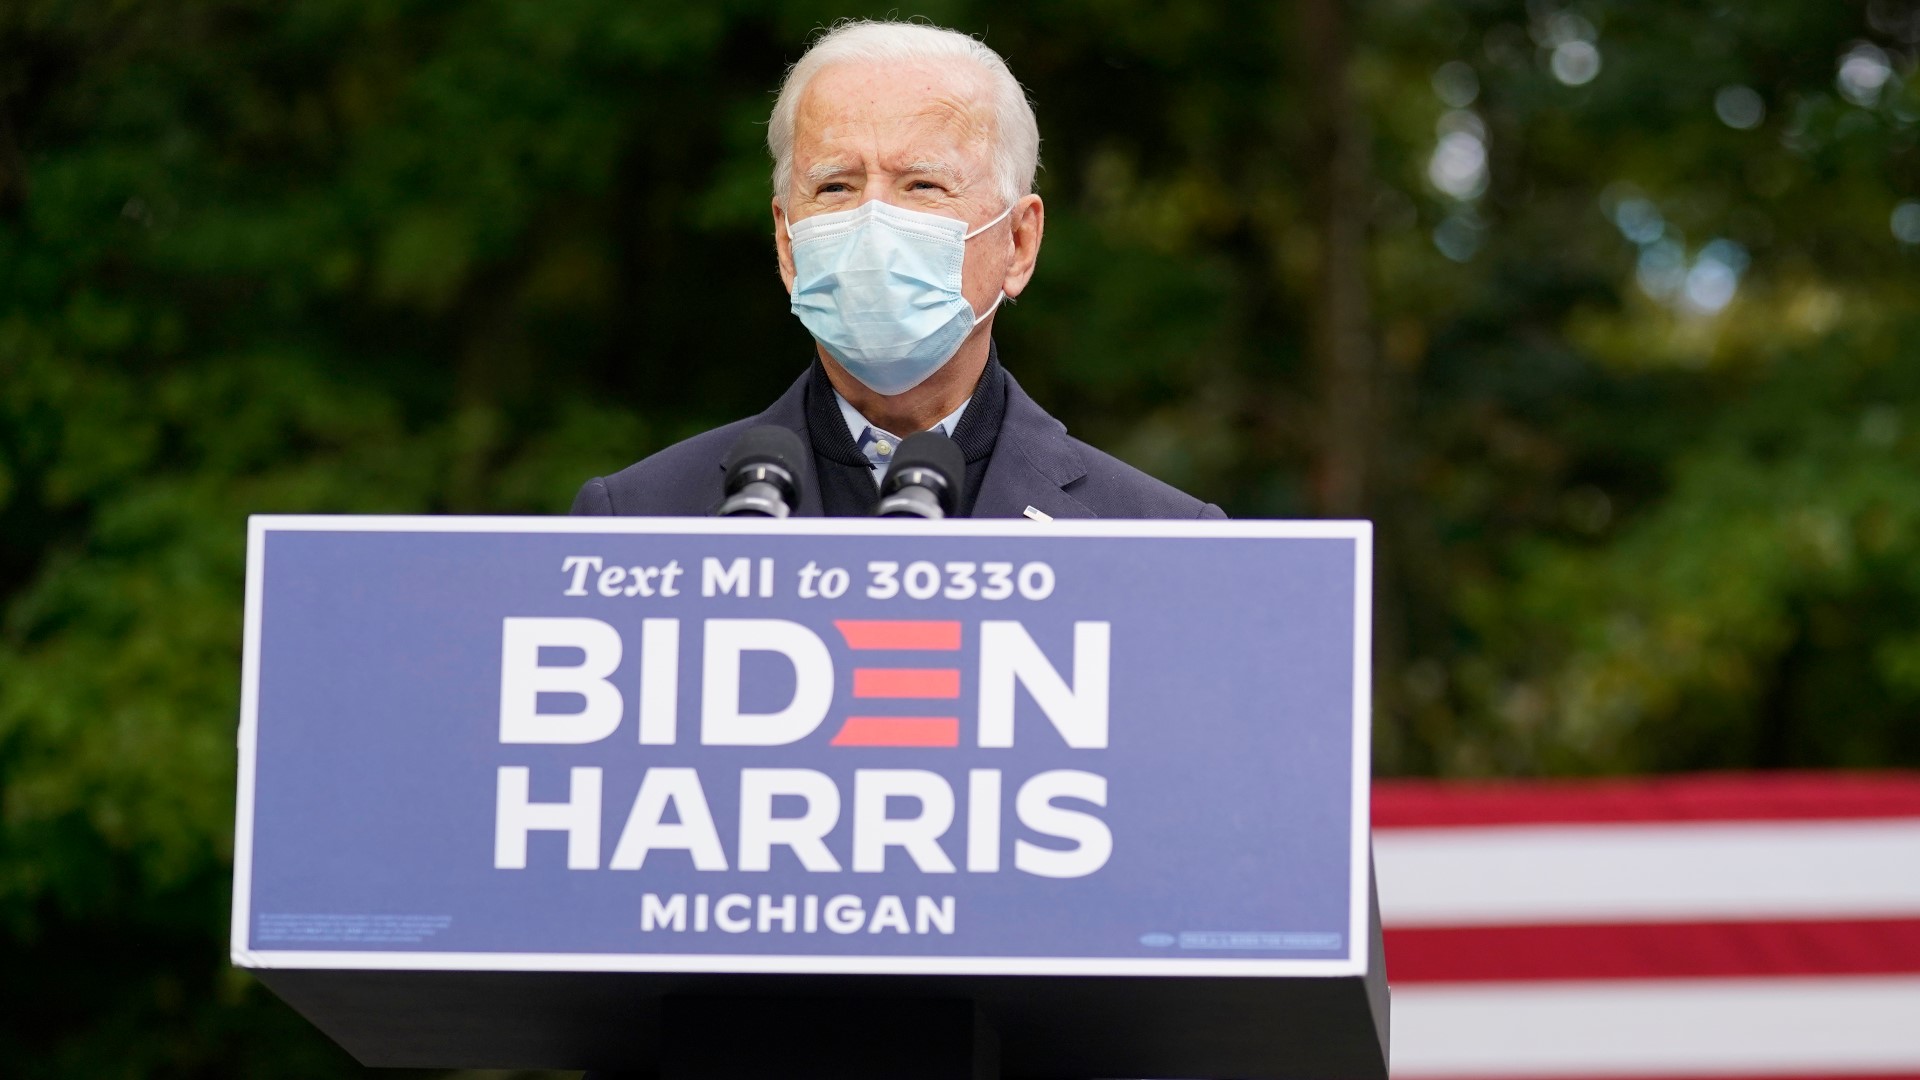 Former Vice President Joe Biden will be making another campaign stop in Michigan. He will be in Southfield and Detroit on Friday, Oct. 16.